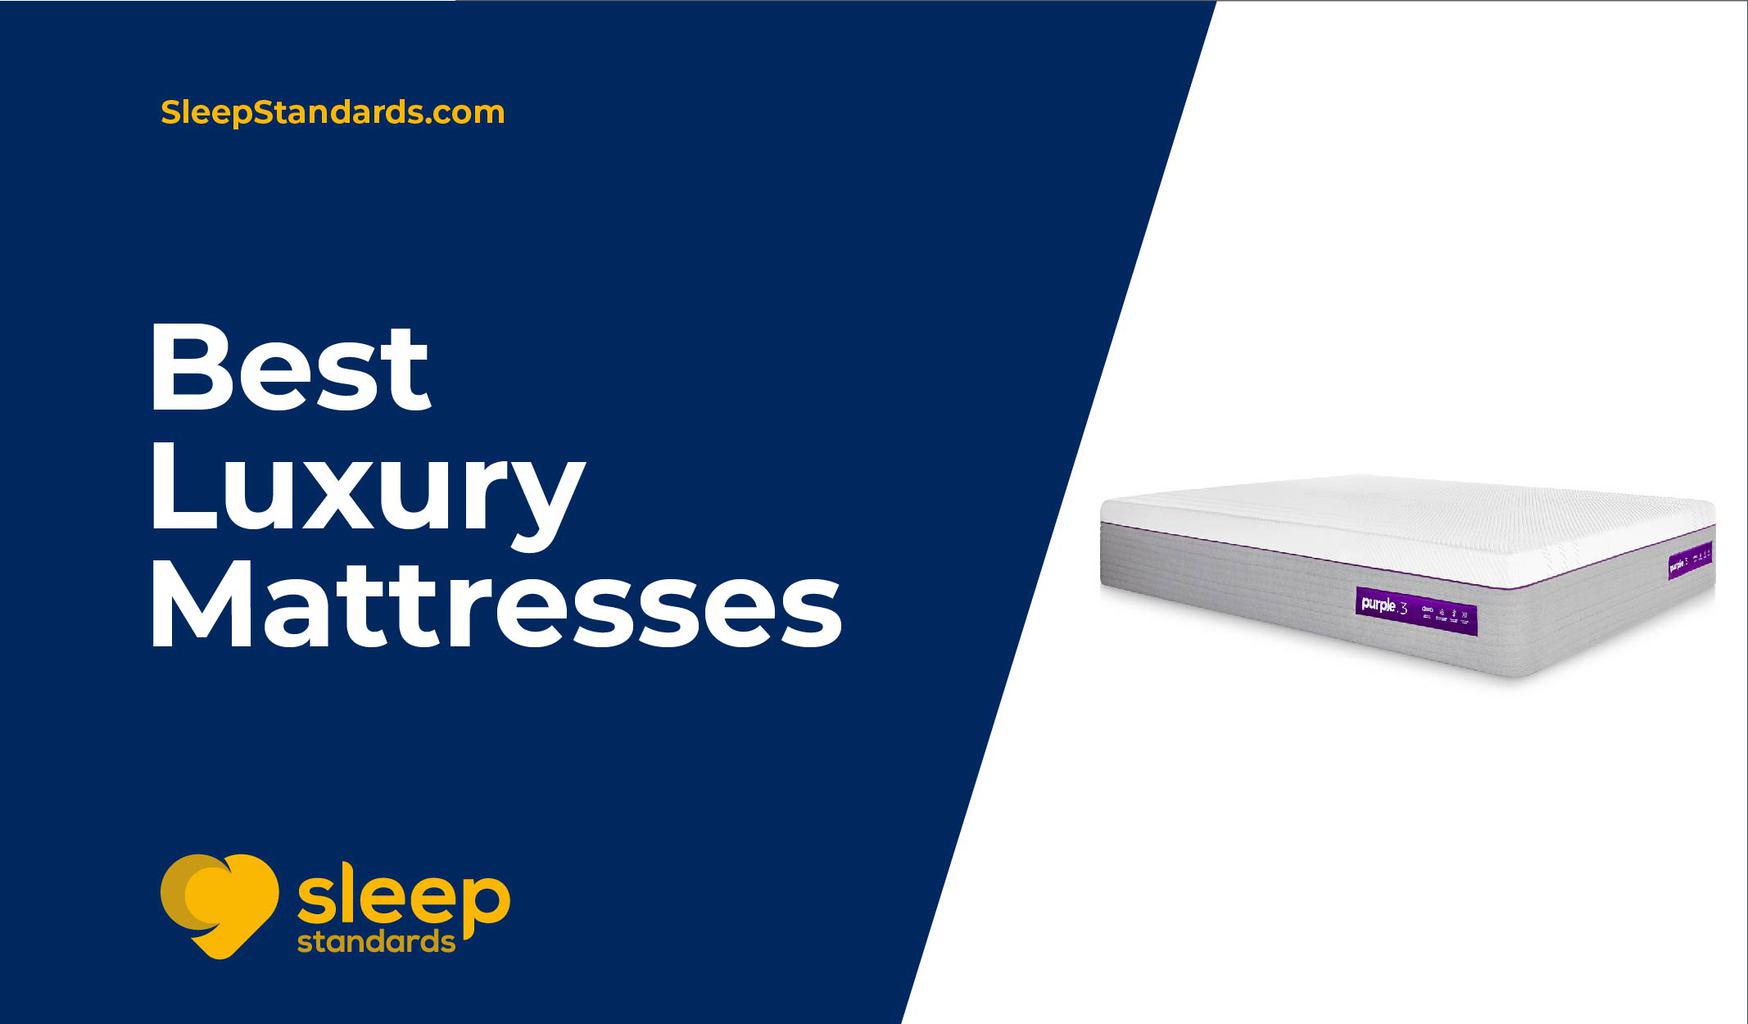 Top 10 Best Luxury Mattresses in 2020 - Complete Guide & Reviews